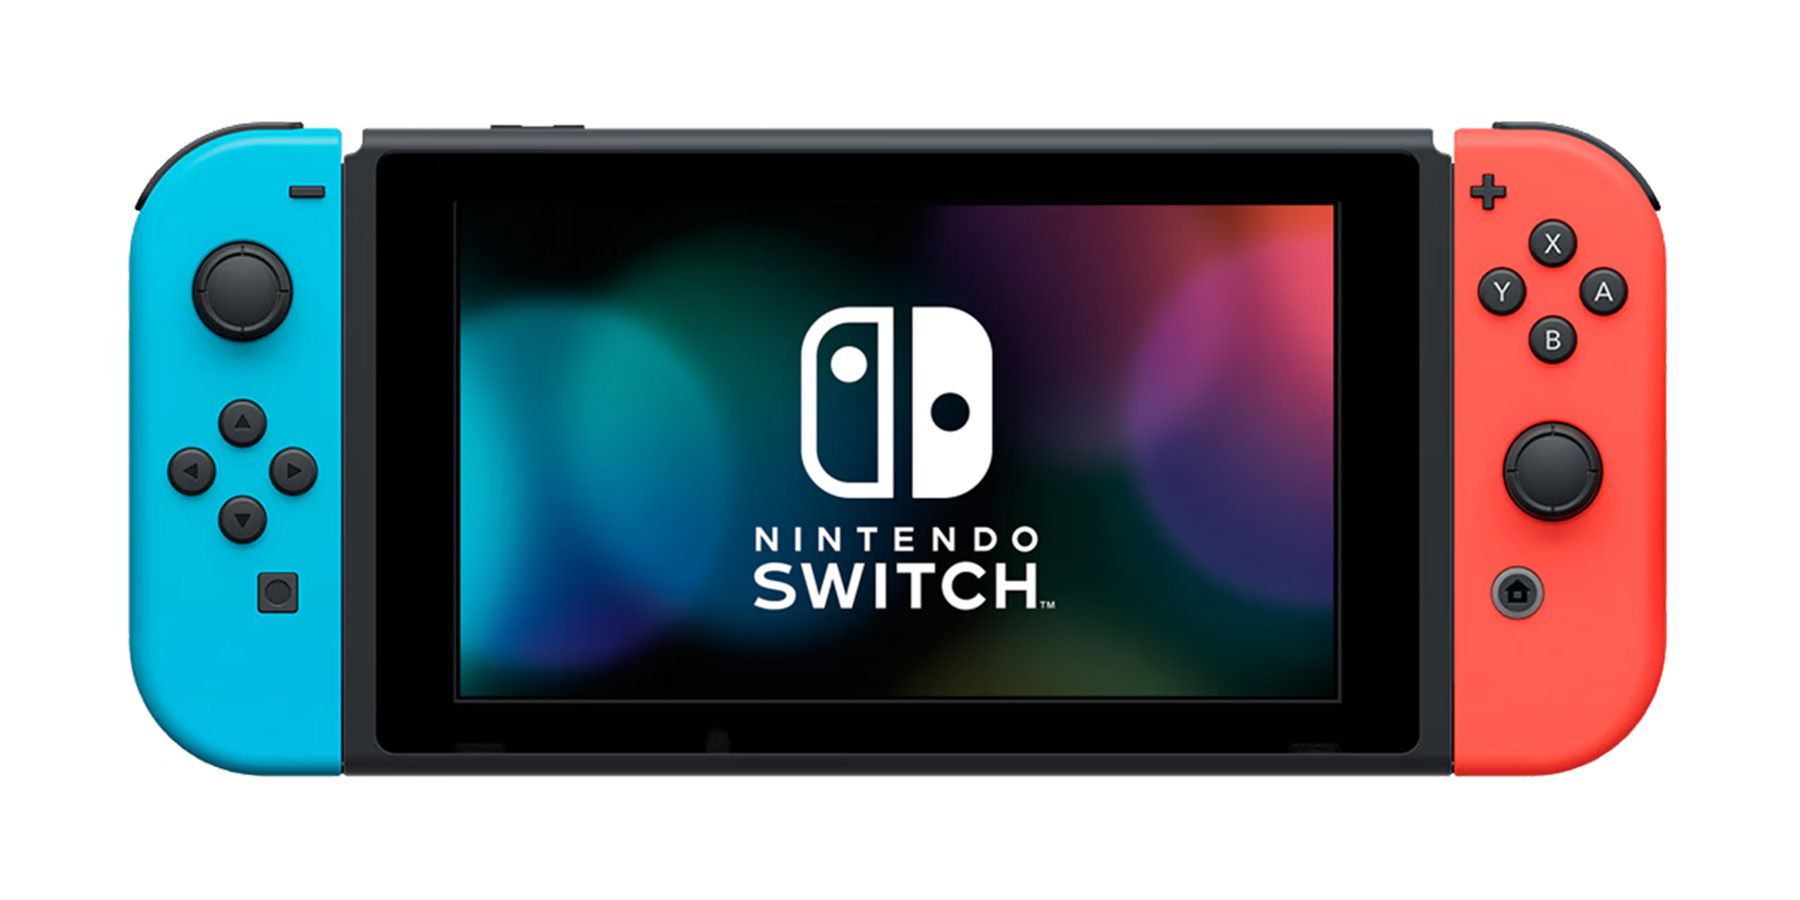 Nintendo Switch console with blue and red Joy-con